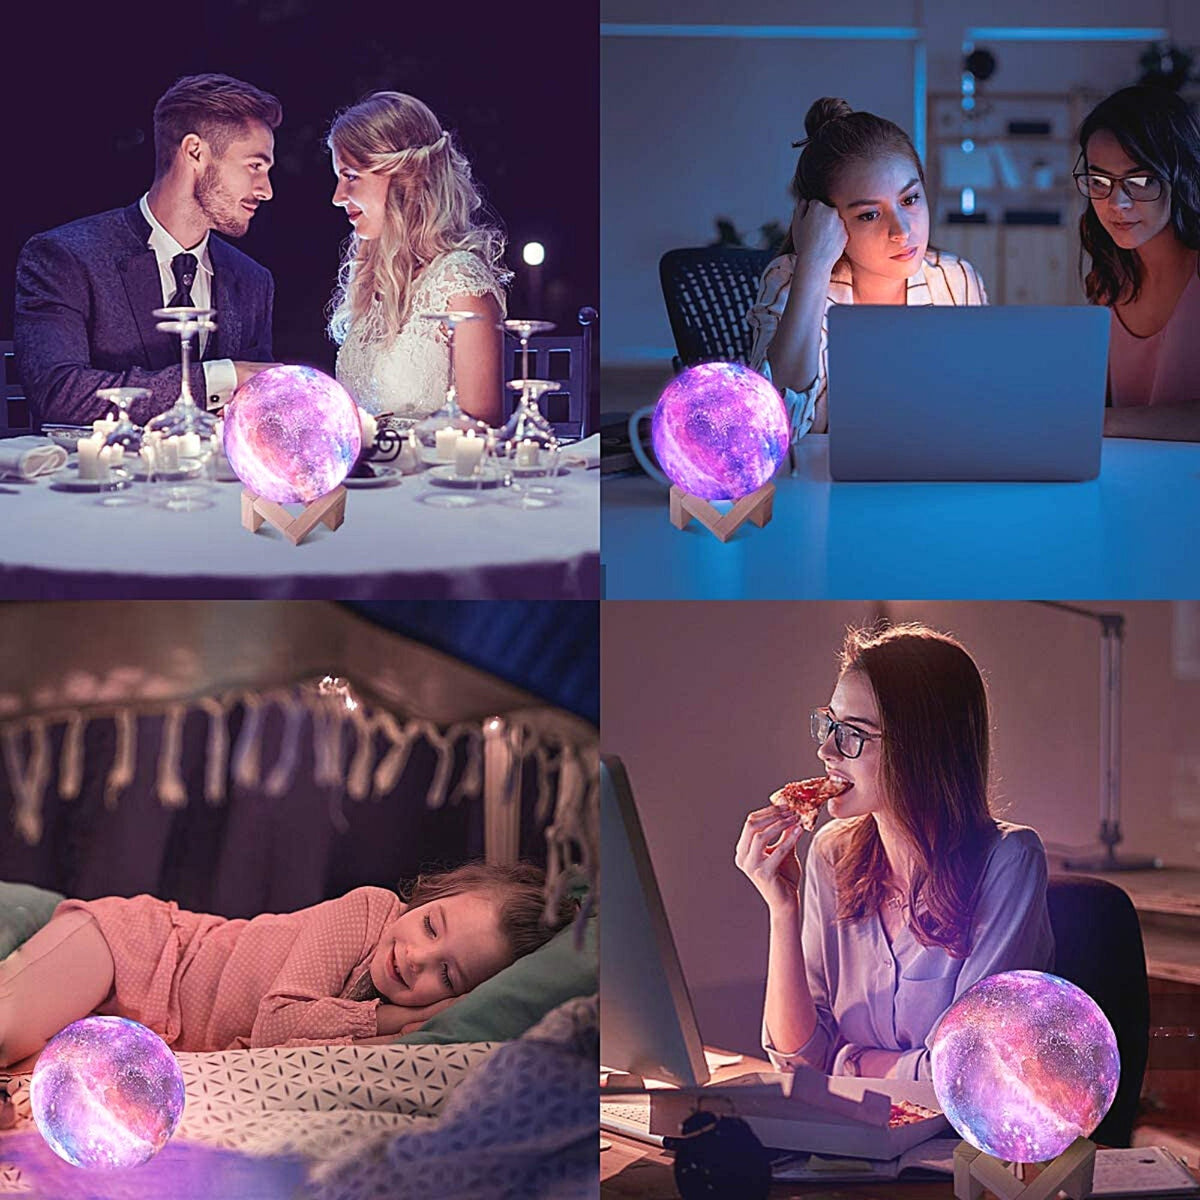 3D Galaxy Moon Lamp - 16 Colors - ESSENTIAL STOCKIST ESSENTIAL STOCKIST